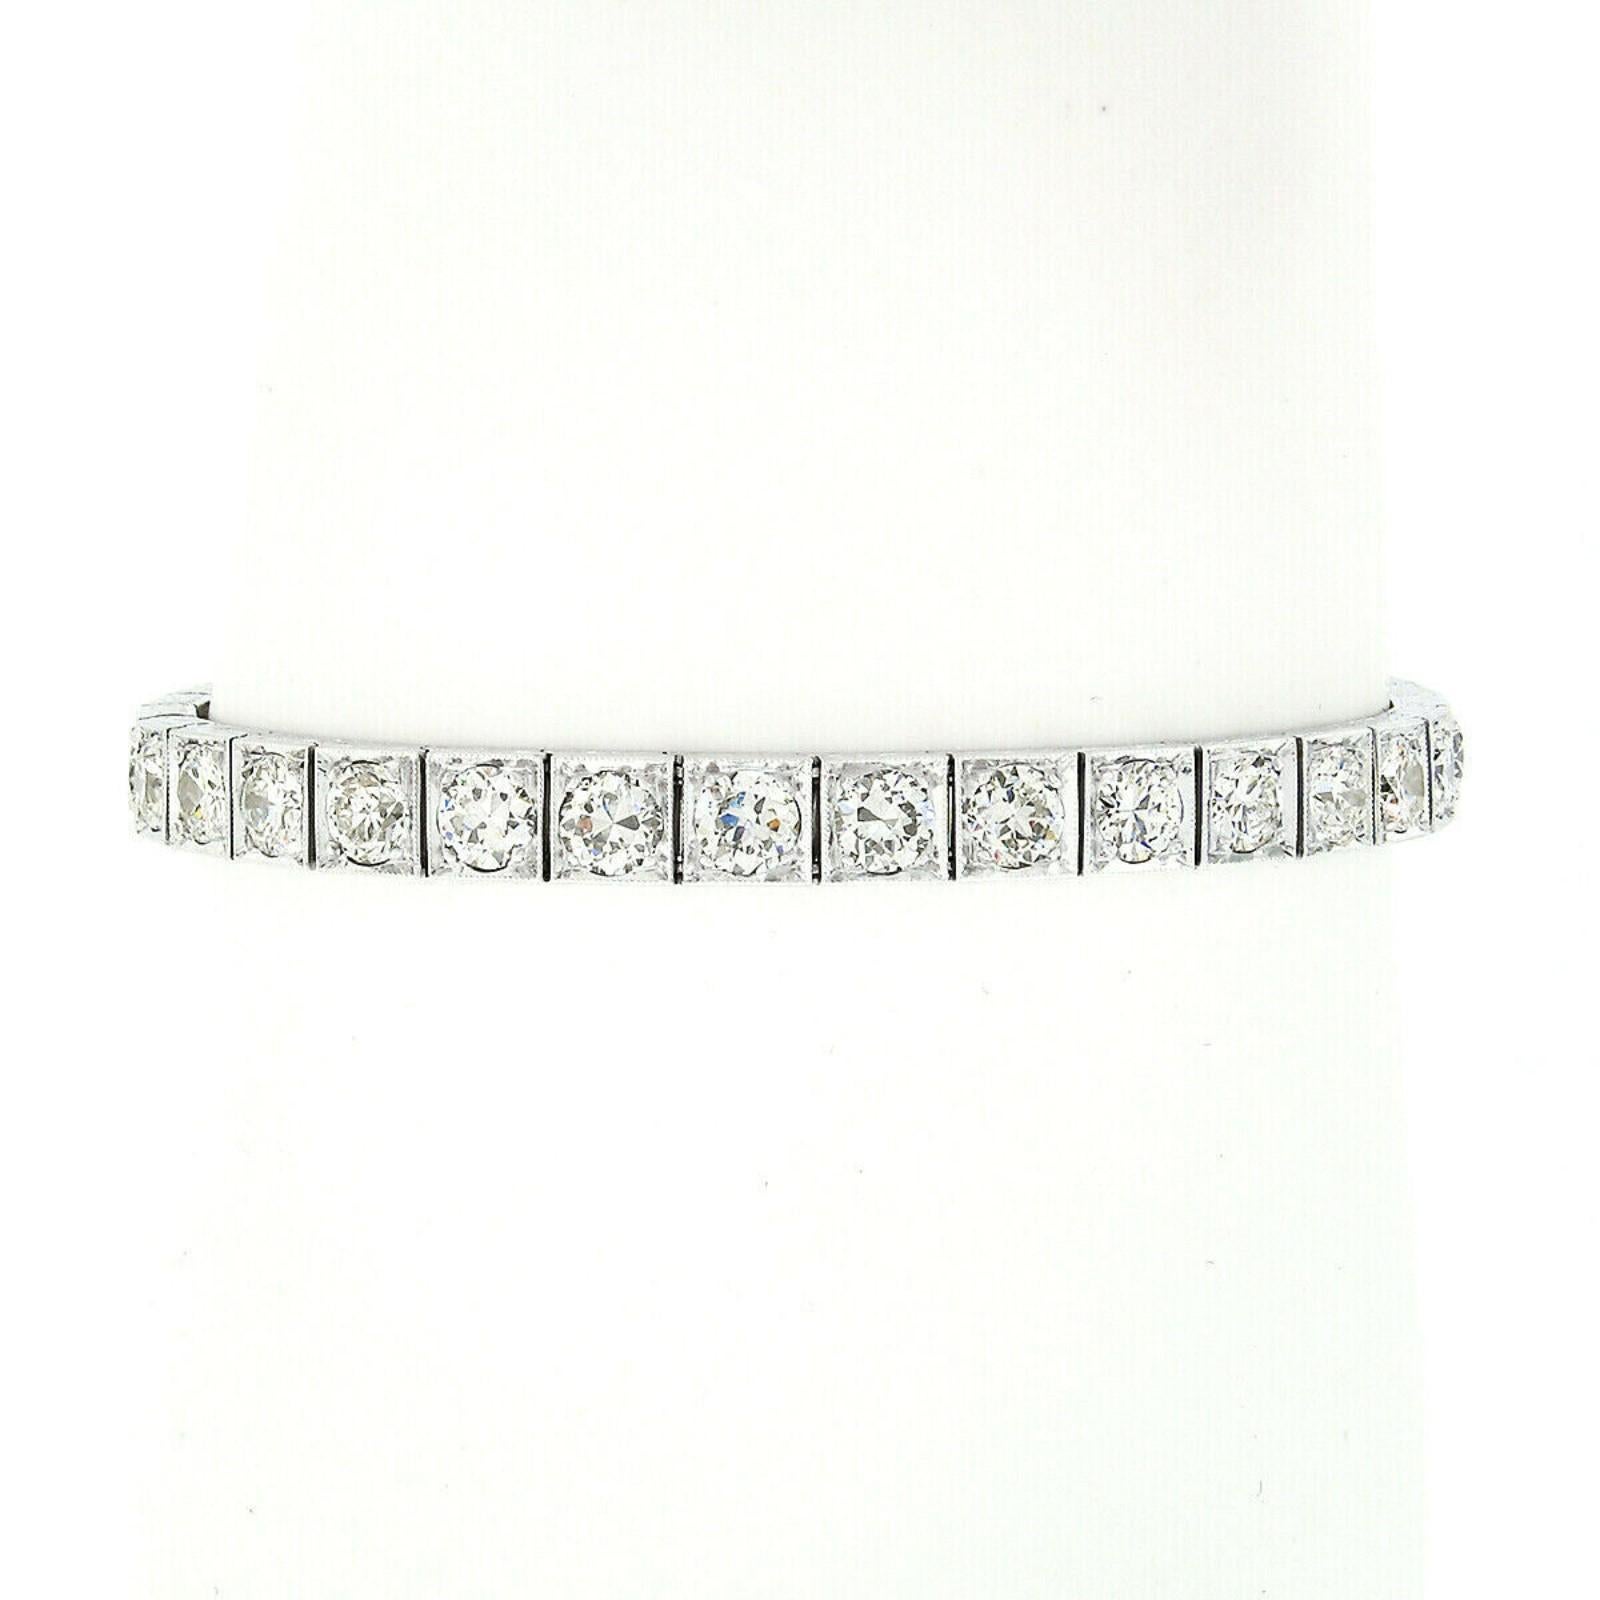 This absolutely breathtaking antique diamond statement tennis bracelet was crafted in solid .900 platinum during the late Art Deco period and is covered with fine quality and LARGE diamonds, amazing milgrain work, and detailed engraving designs on